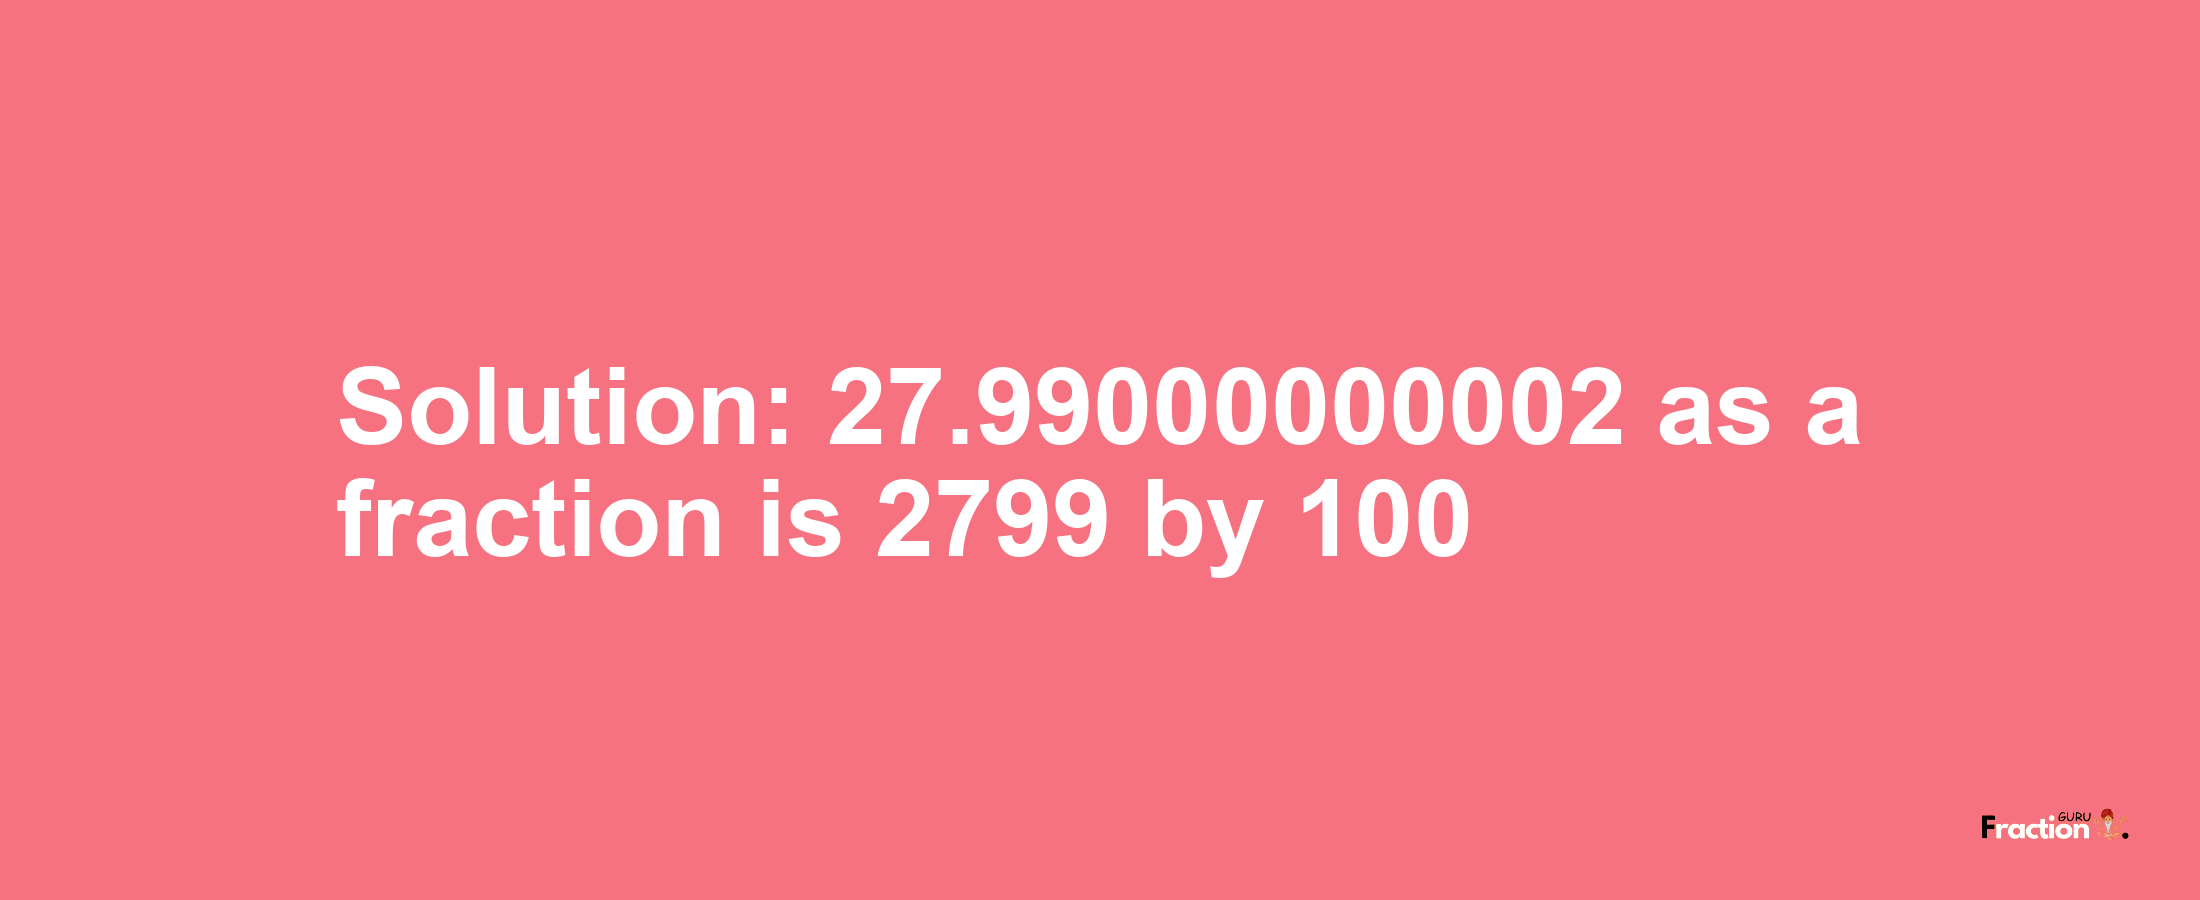 Solution:27.99000000002 as a fraction is 2799/100